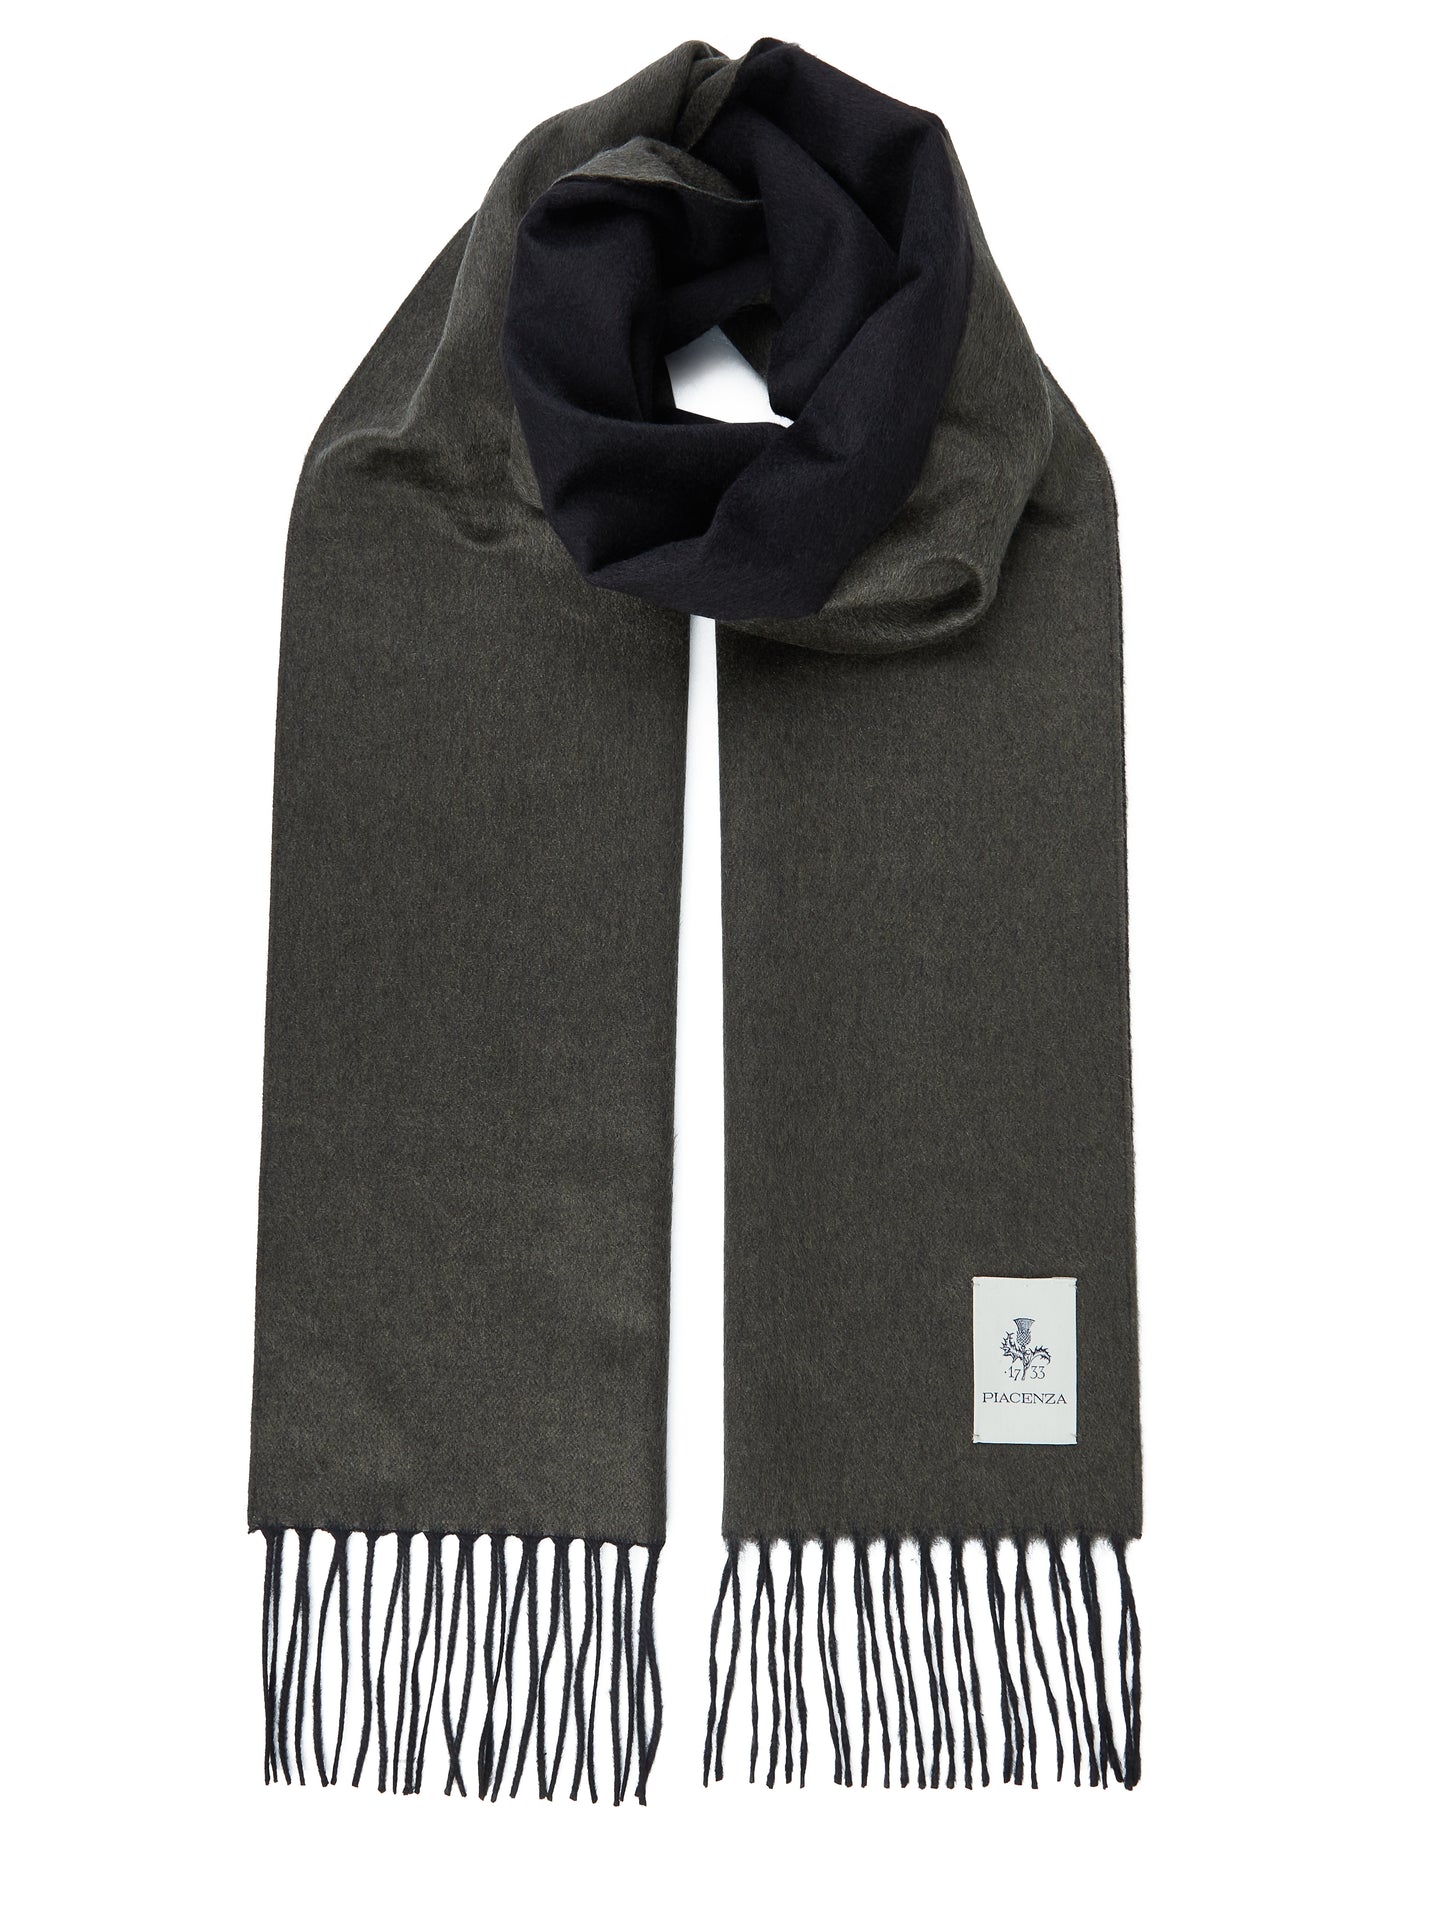 MIRROR - Two-tone gray and black cashmere silk scarf